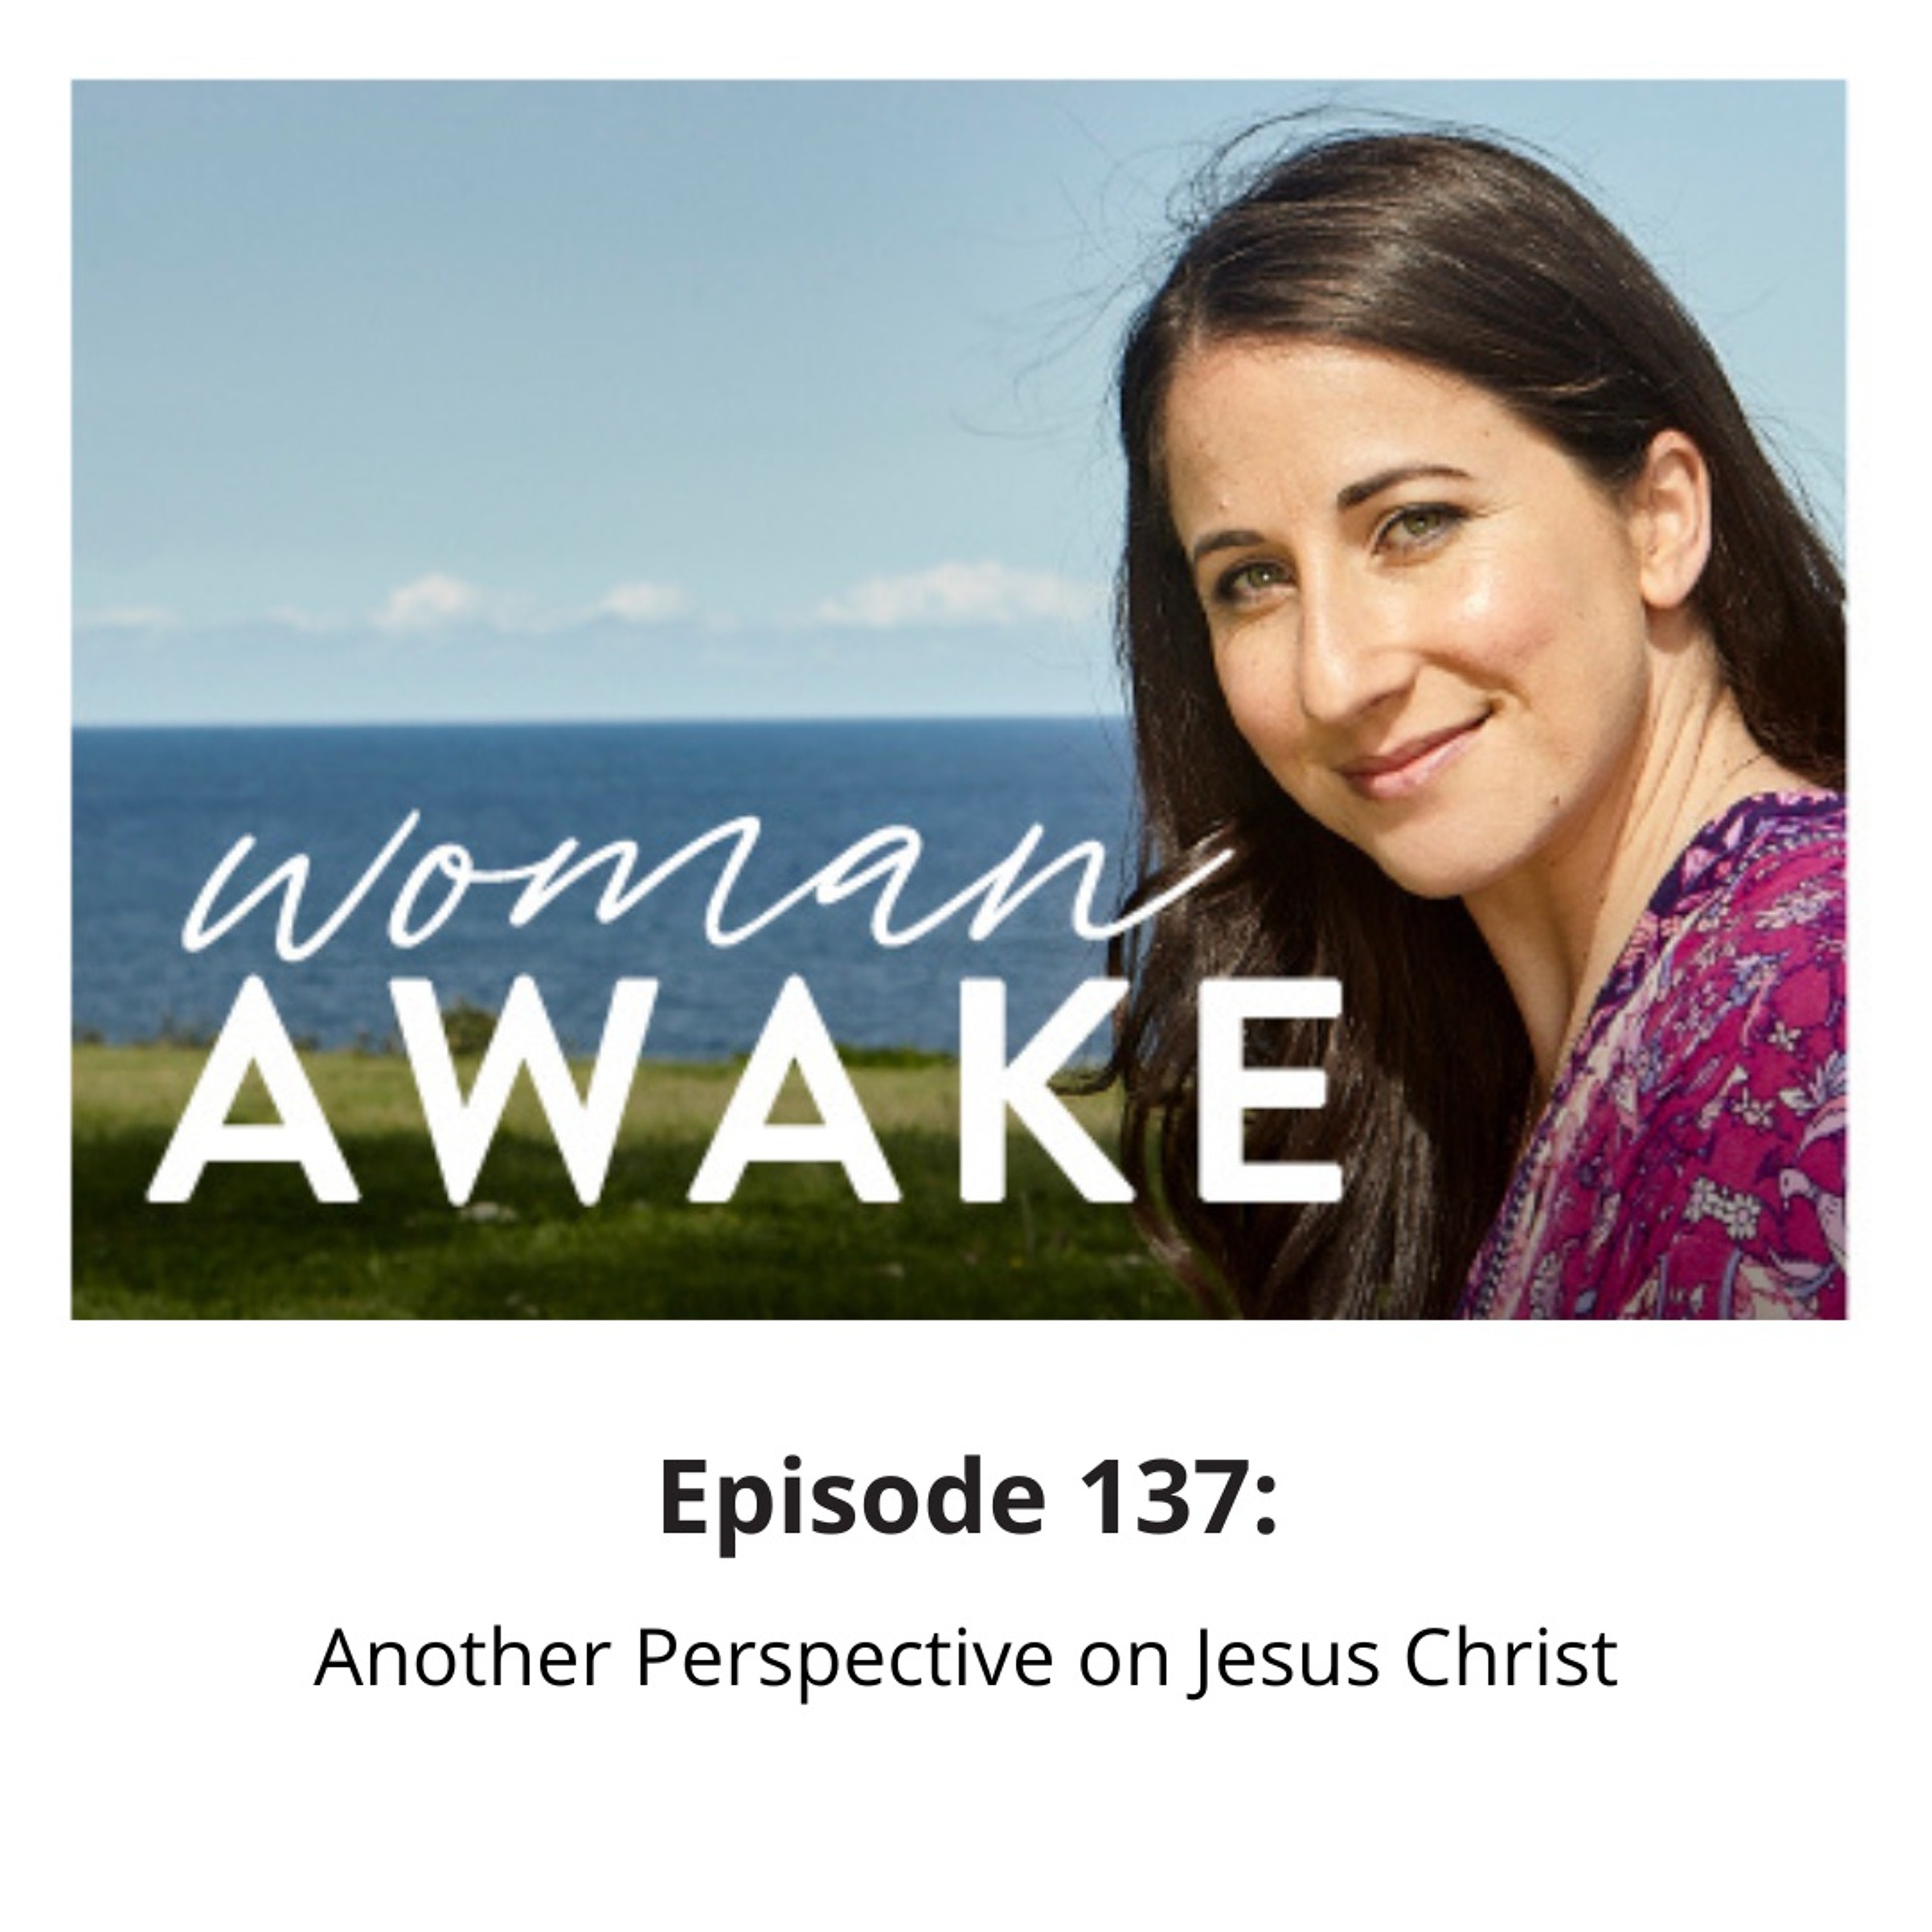 Woman Awake Episode 137 - Another Perspective On Jesus Christ with Shunanda Scott